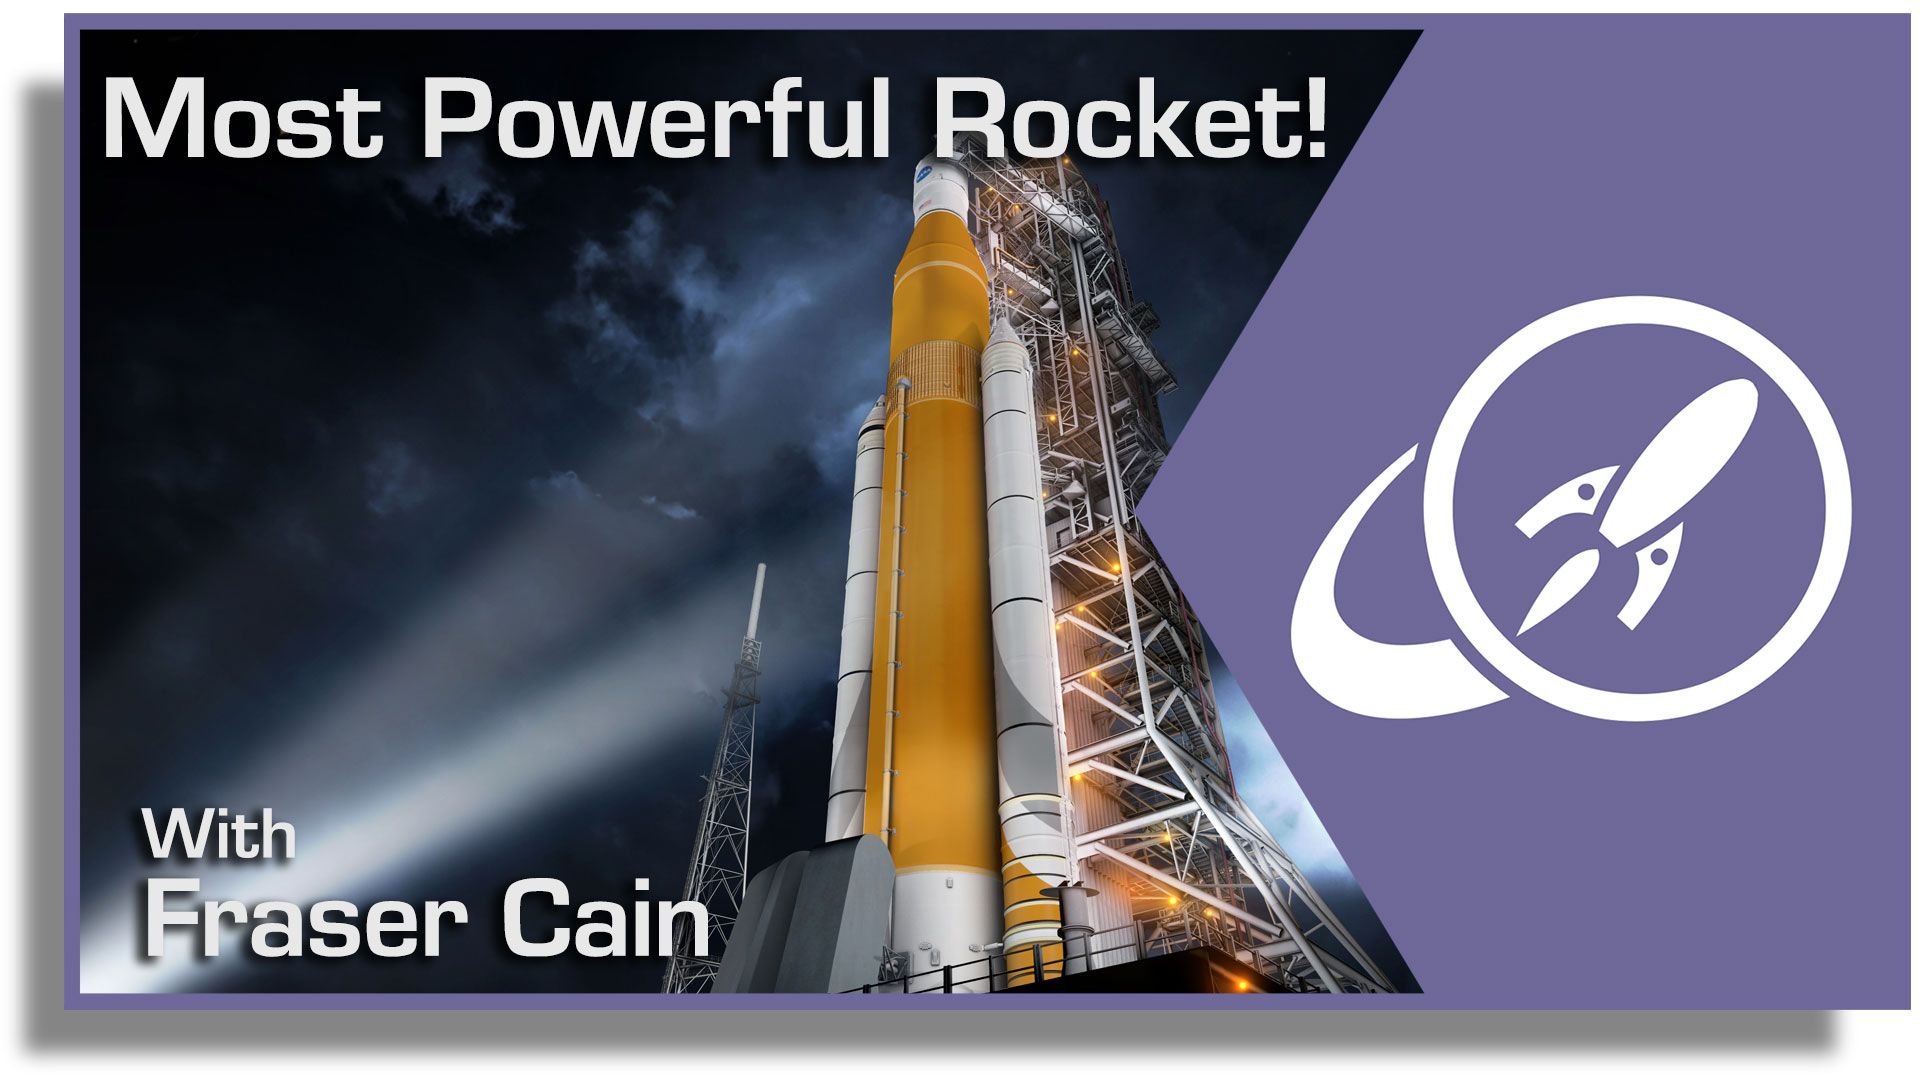 Where Will the Space Launch System Take Us? Preparing For The Most Powerful Rocket Ever Built